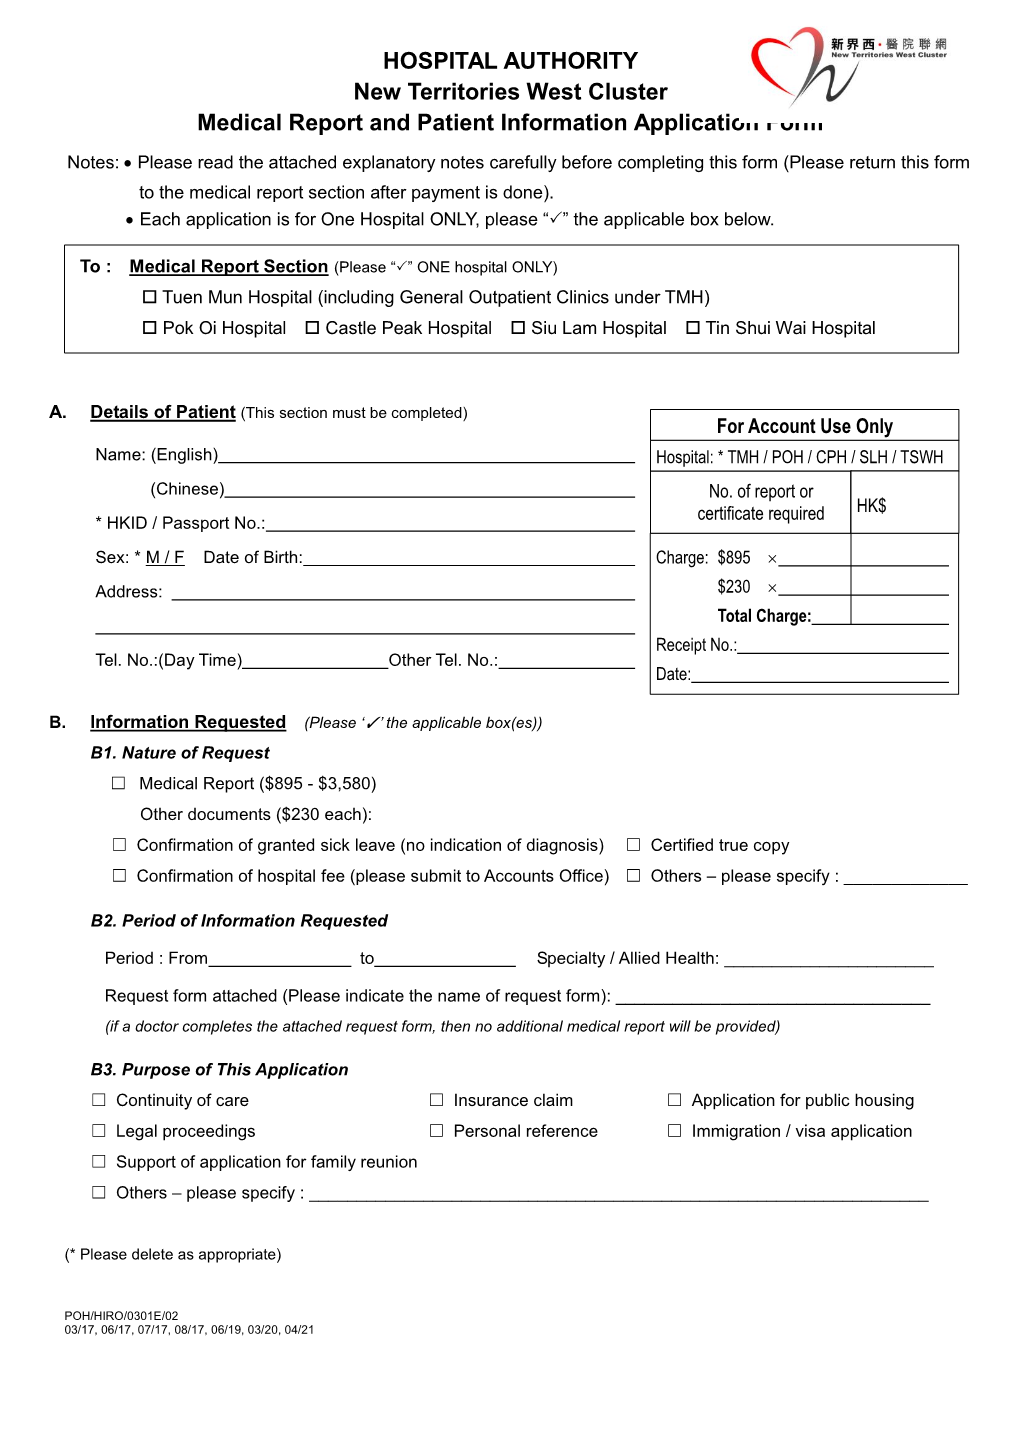 HOSPITAL AUTHORITY New Territories West Cluster Medical Report and Patient Information Application Form